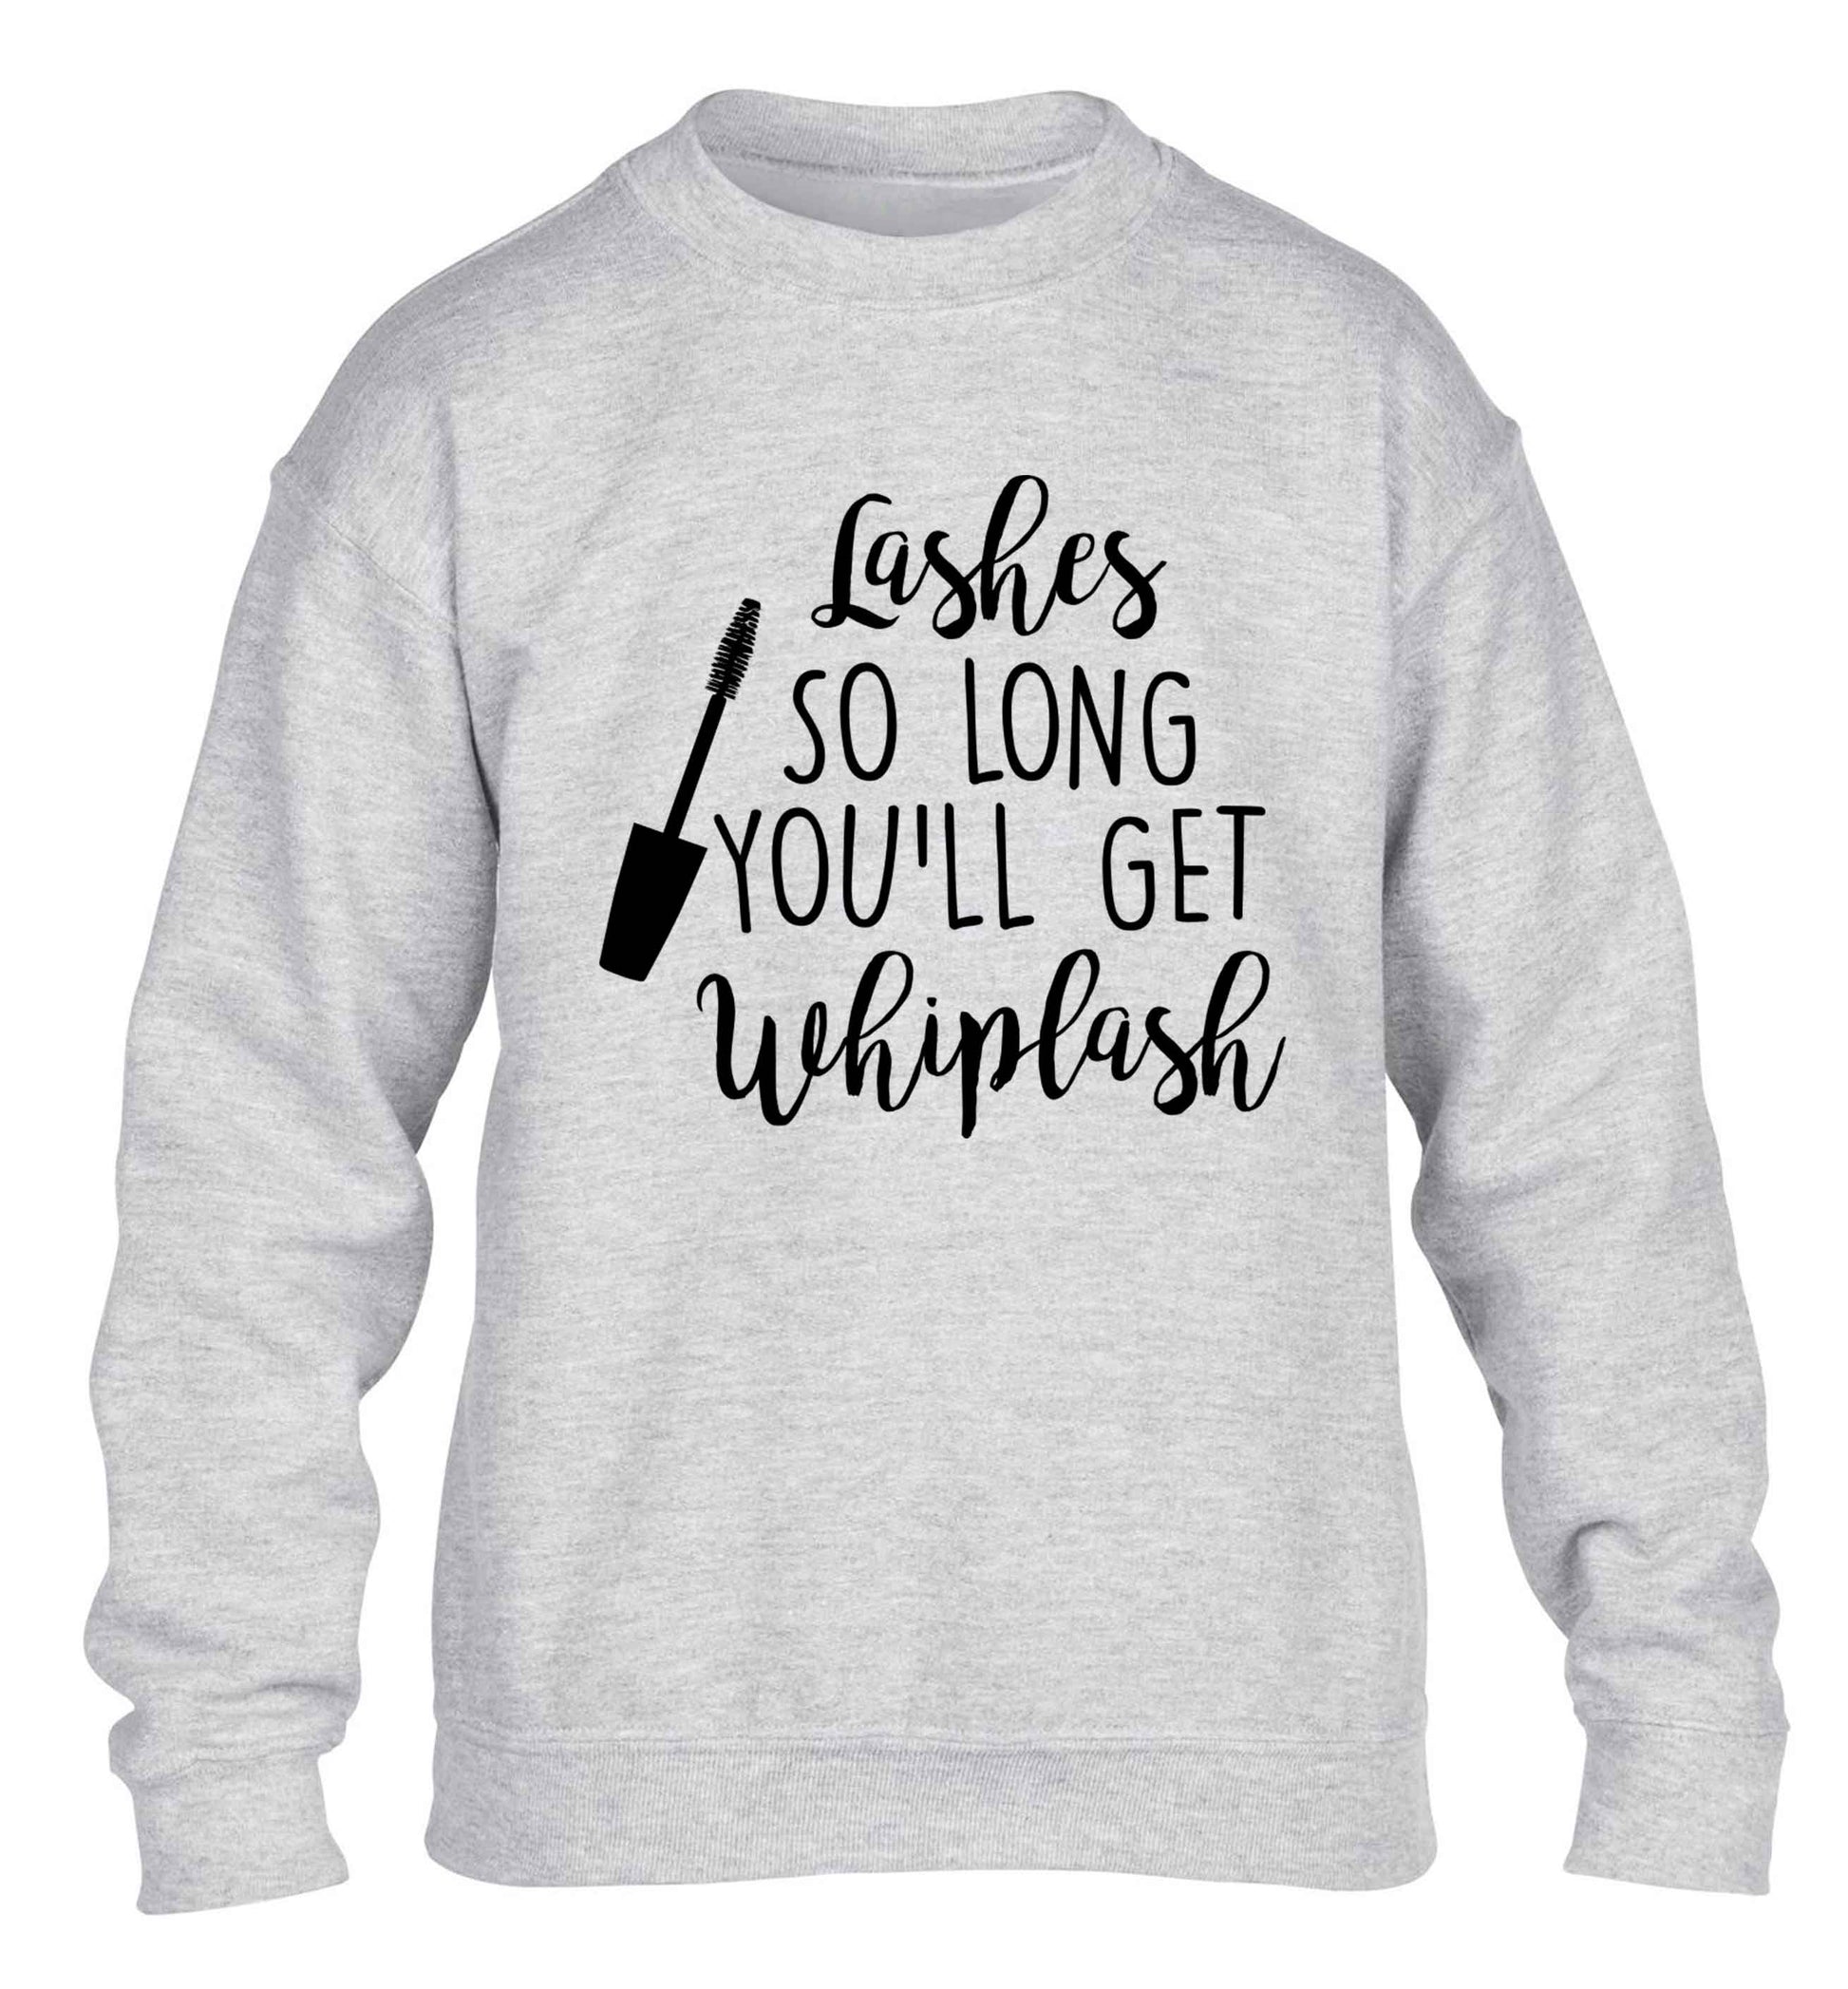 Lashes so long you'll get whiplash children's grey sweater 12-13 Years